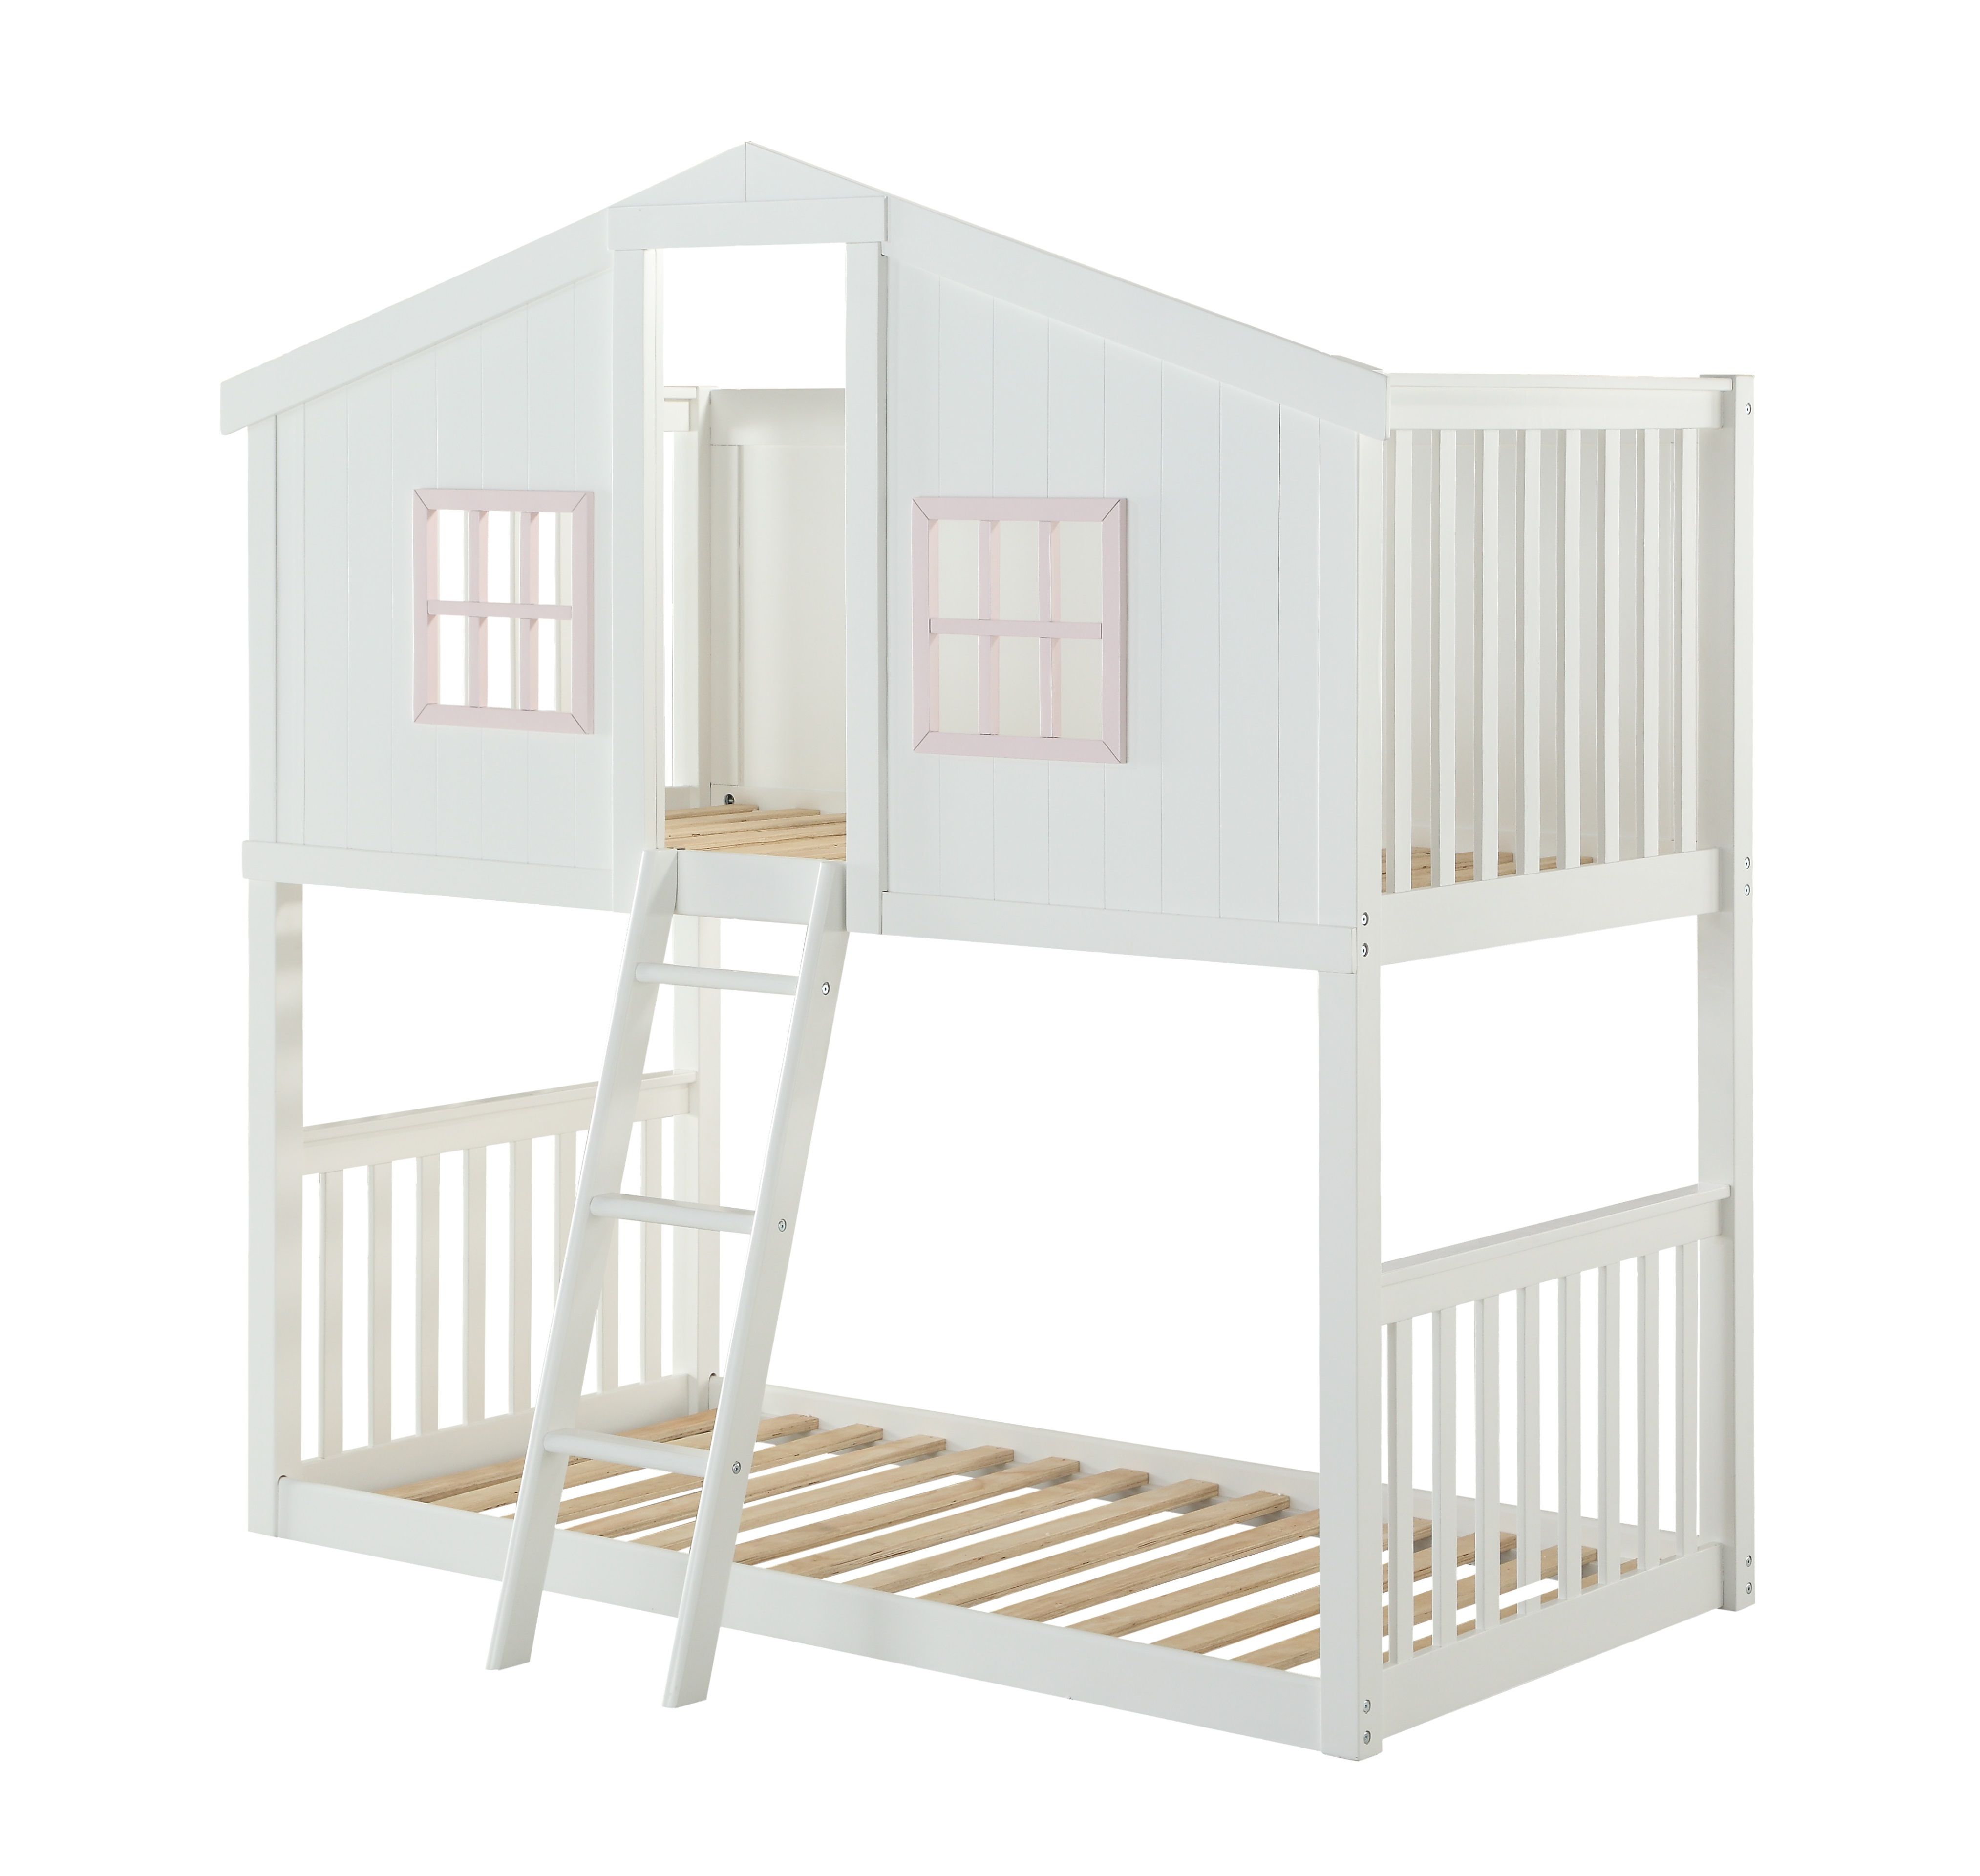 ACME Rohan Twin-Over-Twin Size House-Shaped Bunk Bed Frame with Ladder, and Wooden Slats Support, No Spring Box Required (Frame Only) - White